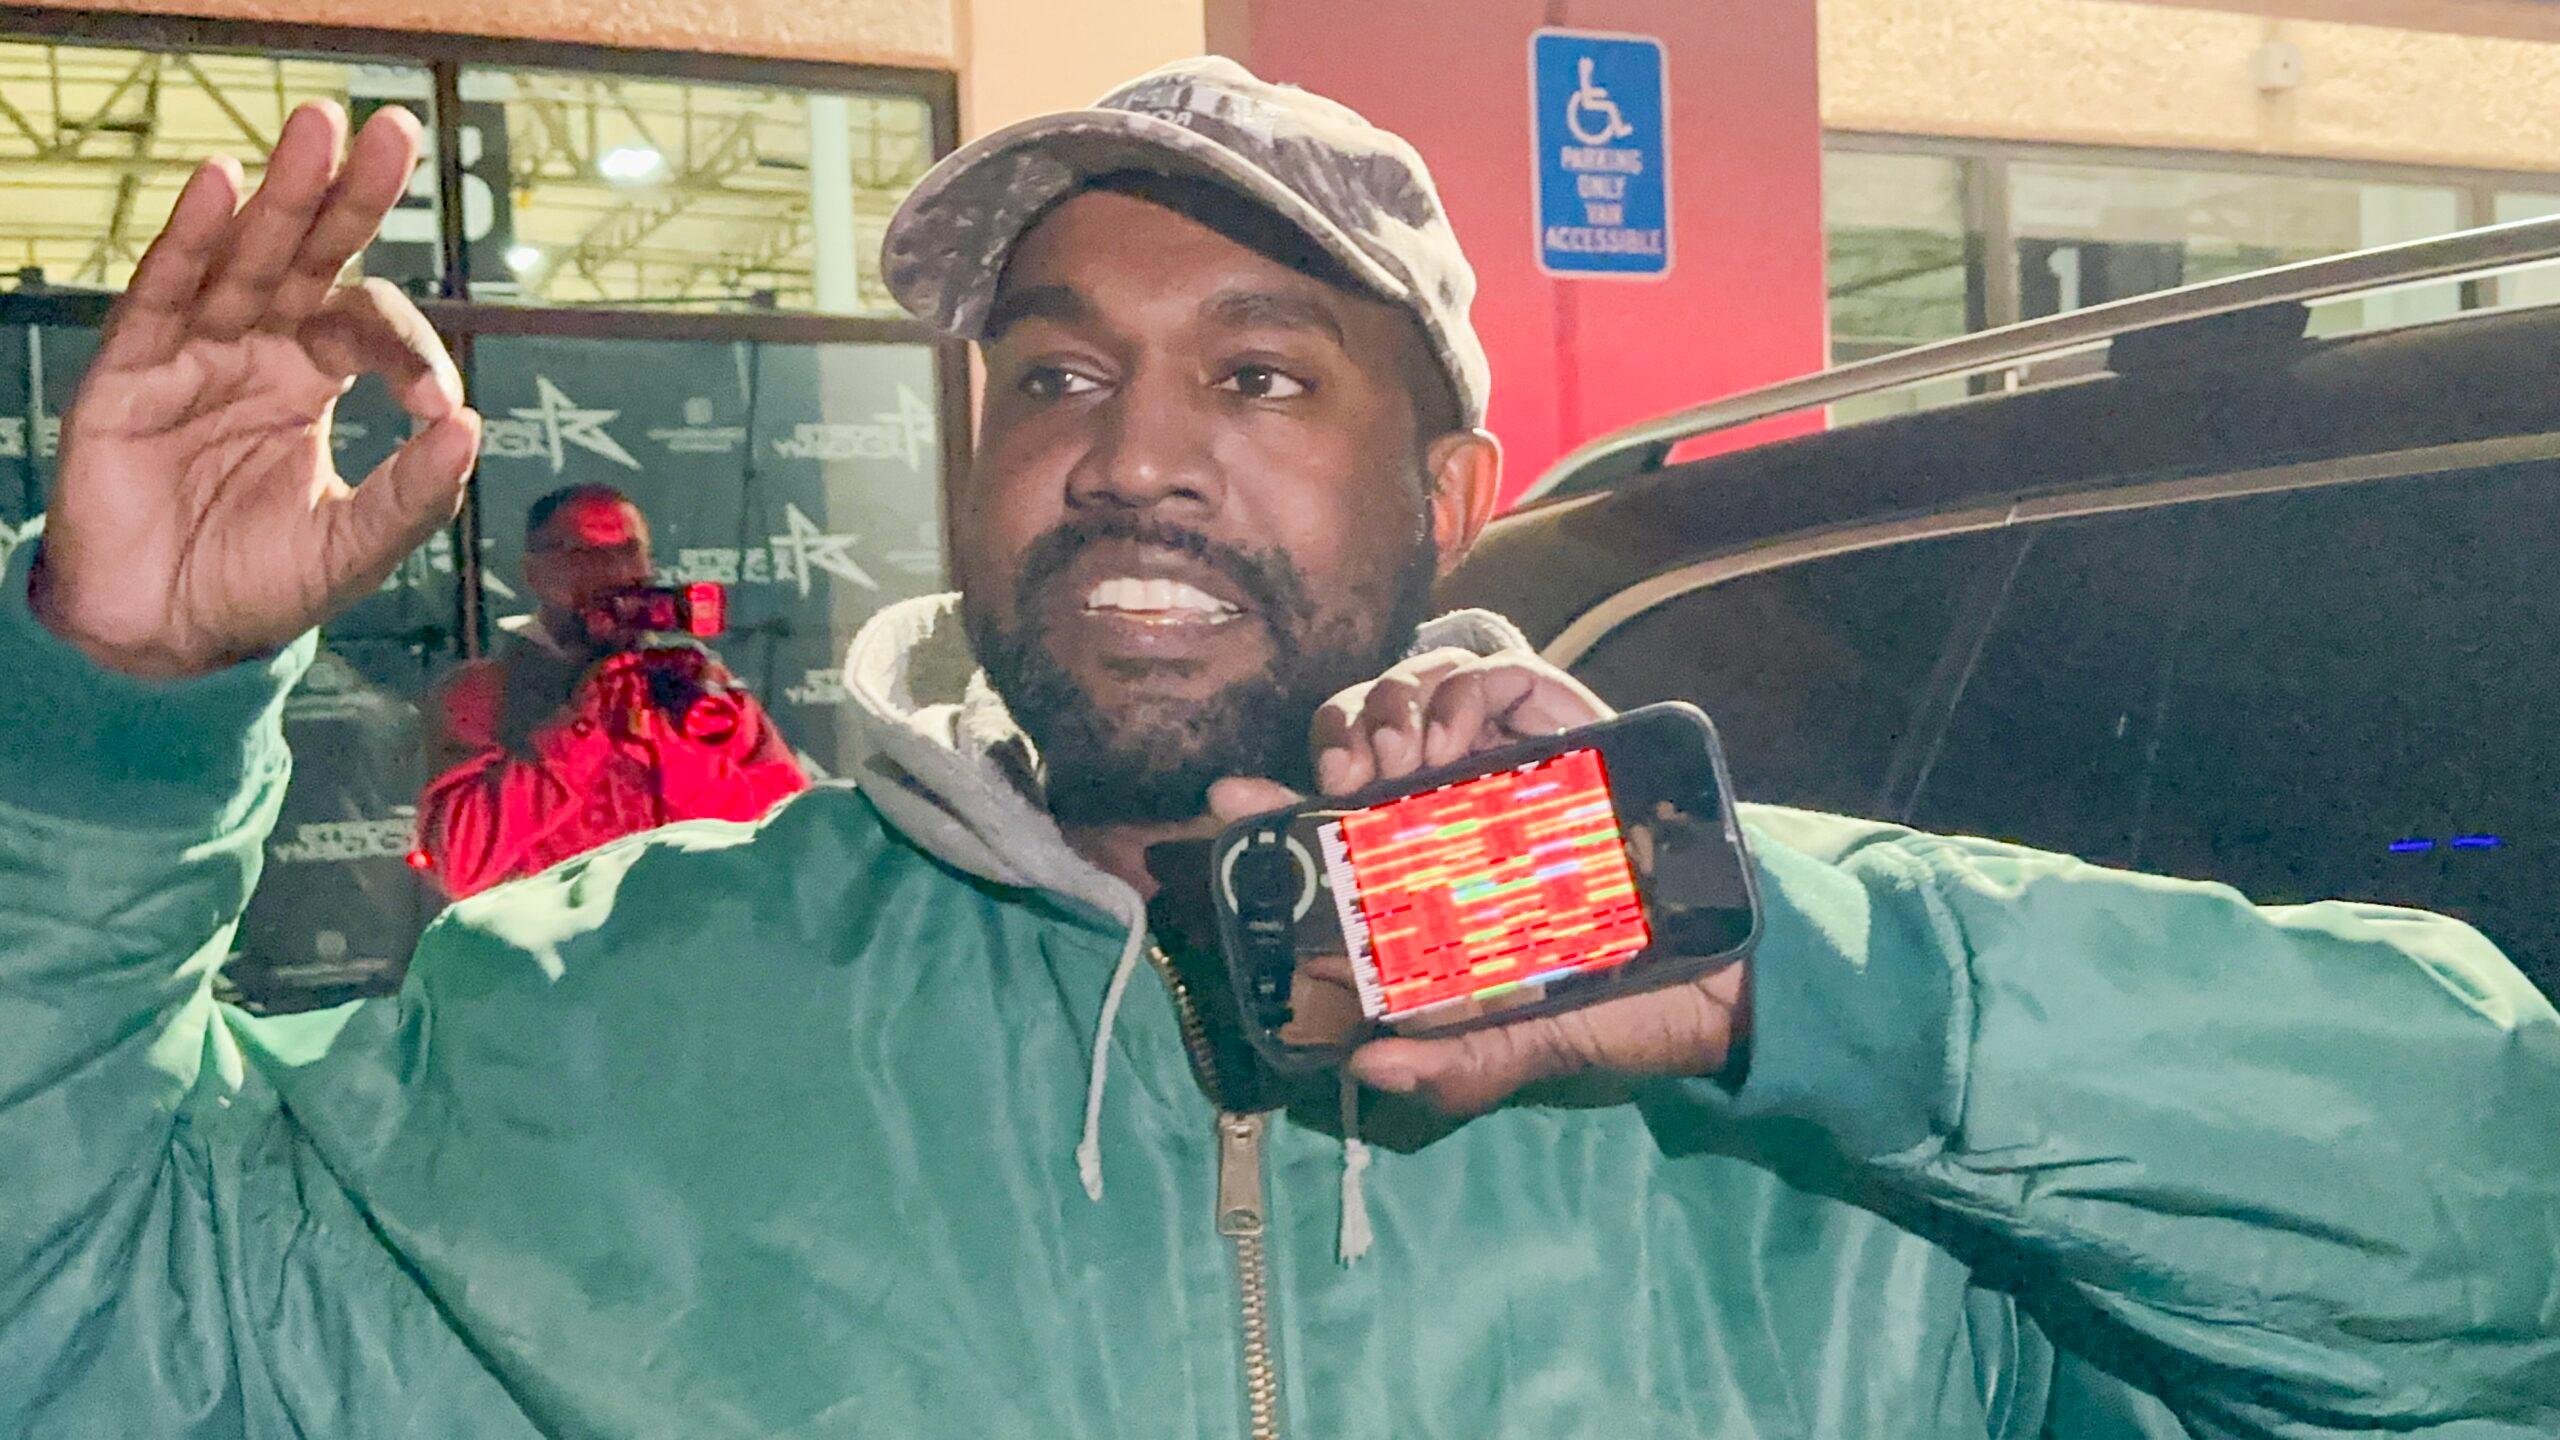 Adidas plans to drop Ye from Yeezy, Kanye West still silent